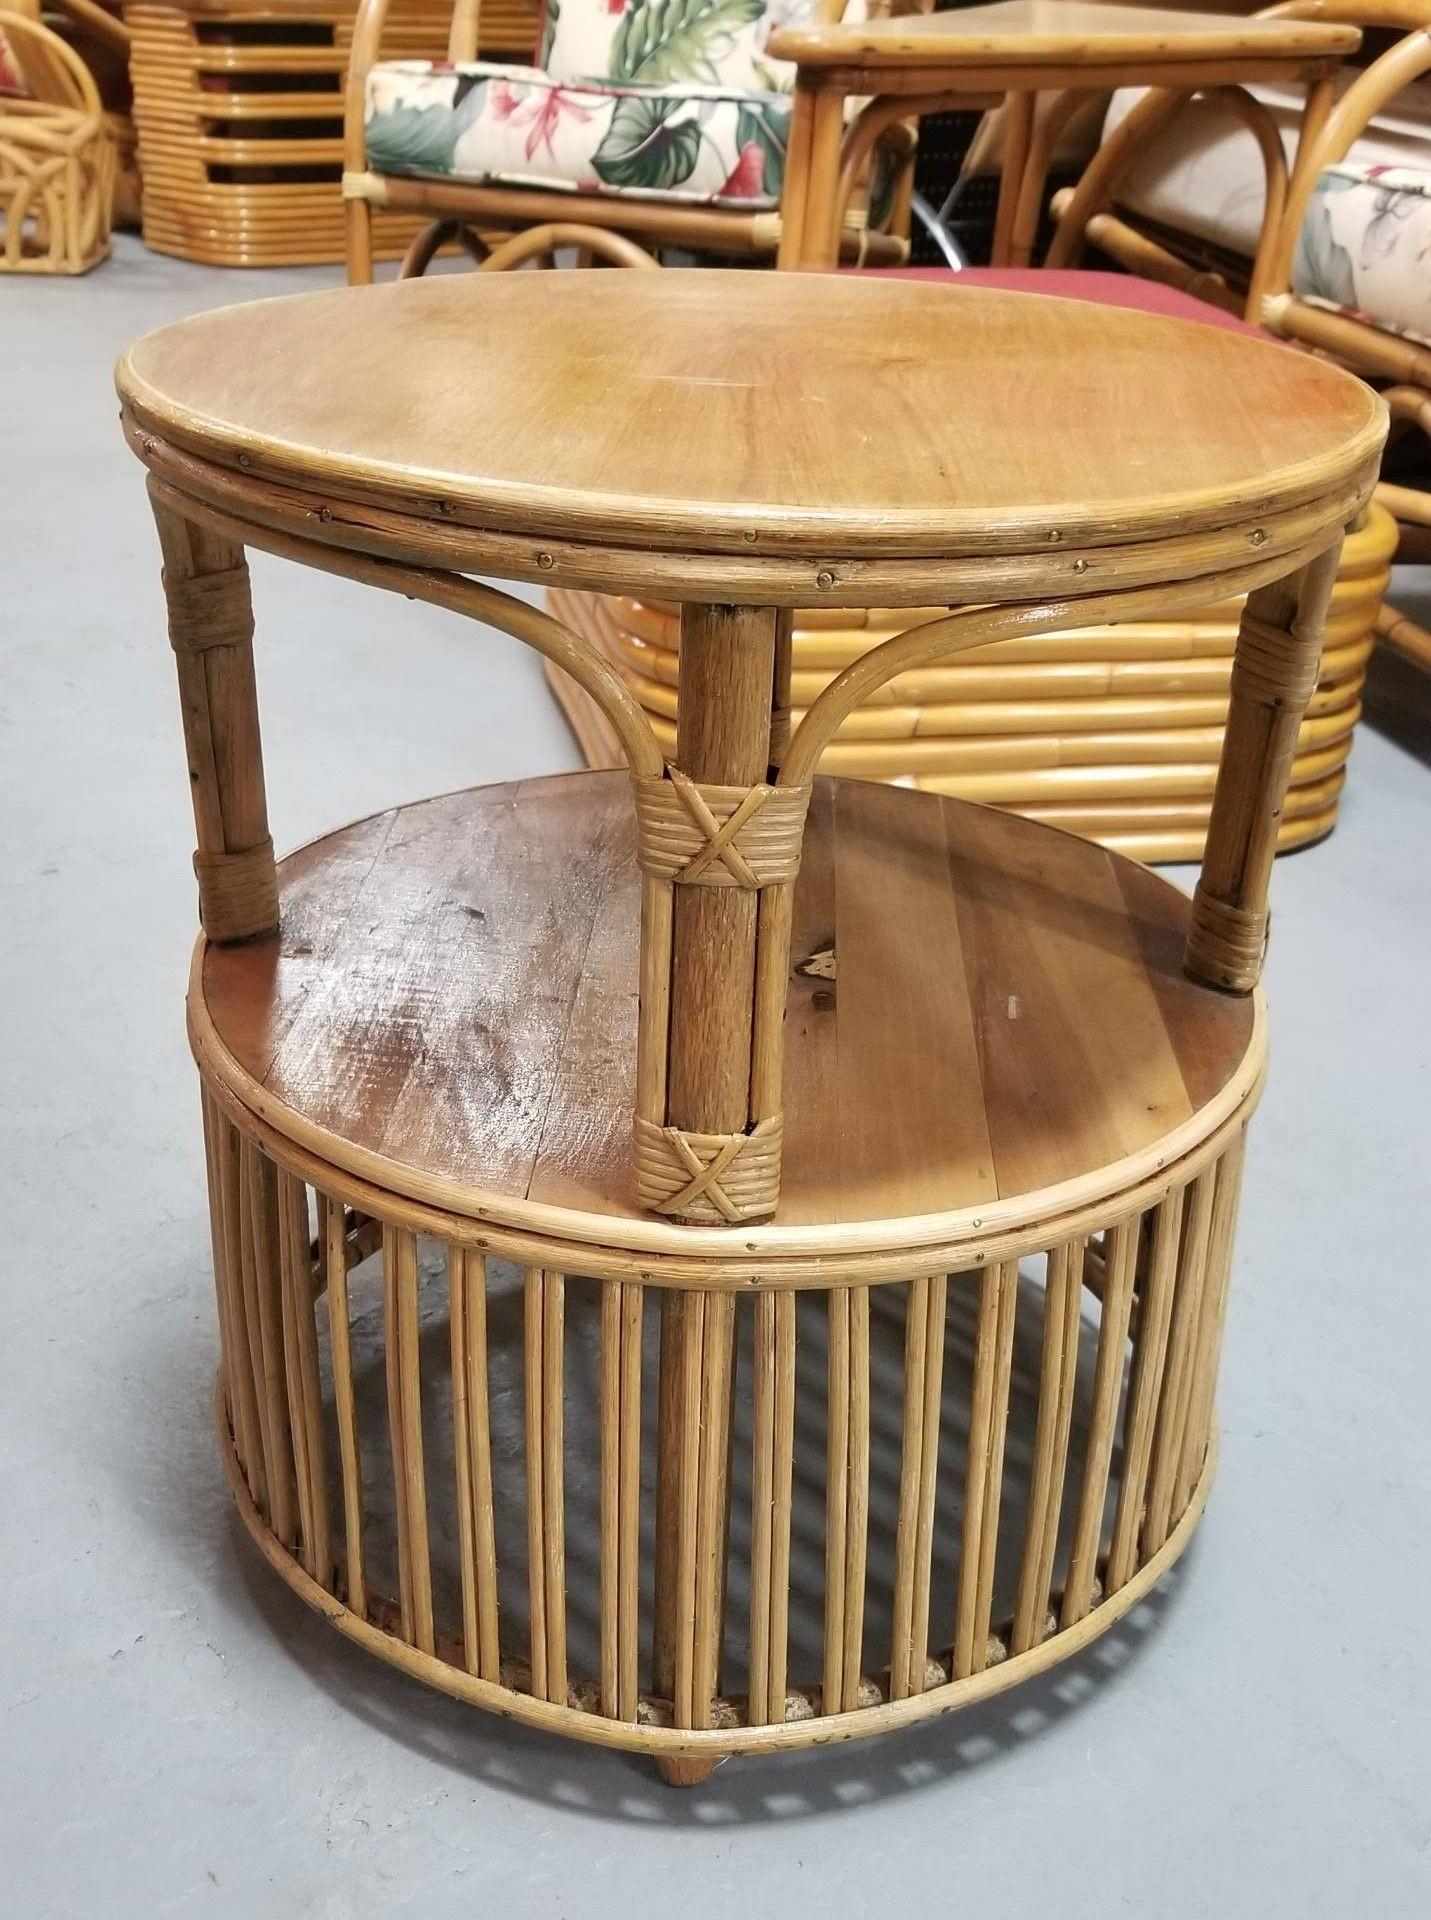 Restored mid-century rattan 2-tiered round side table with pencil reed drum style base. In the style of Gabriella Crespi.

Circa 1940, United States

We only purchase and sell only the best and finest rattan furniture made by the best and most